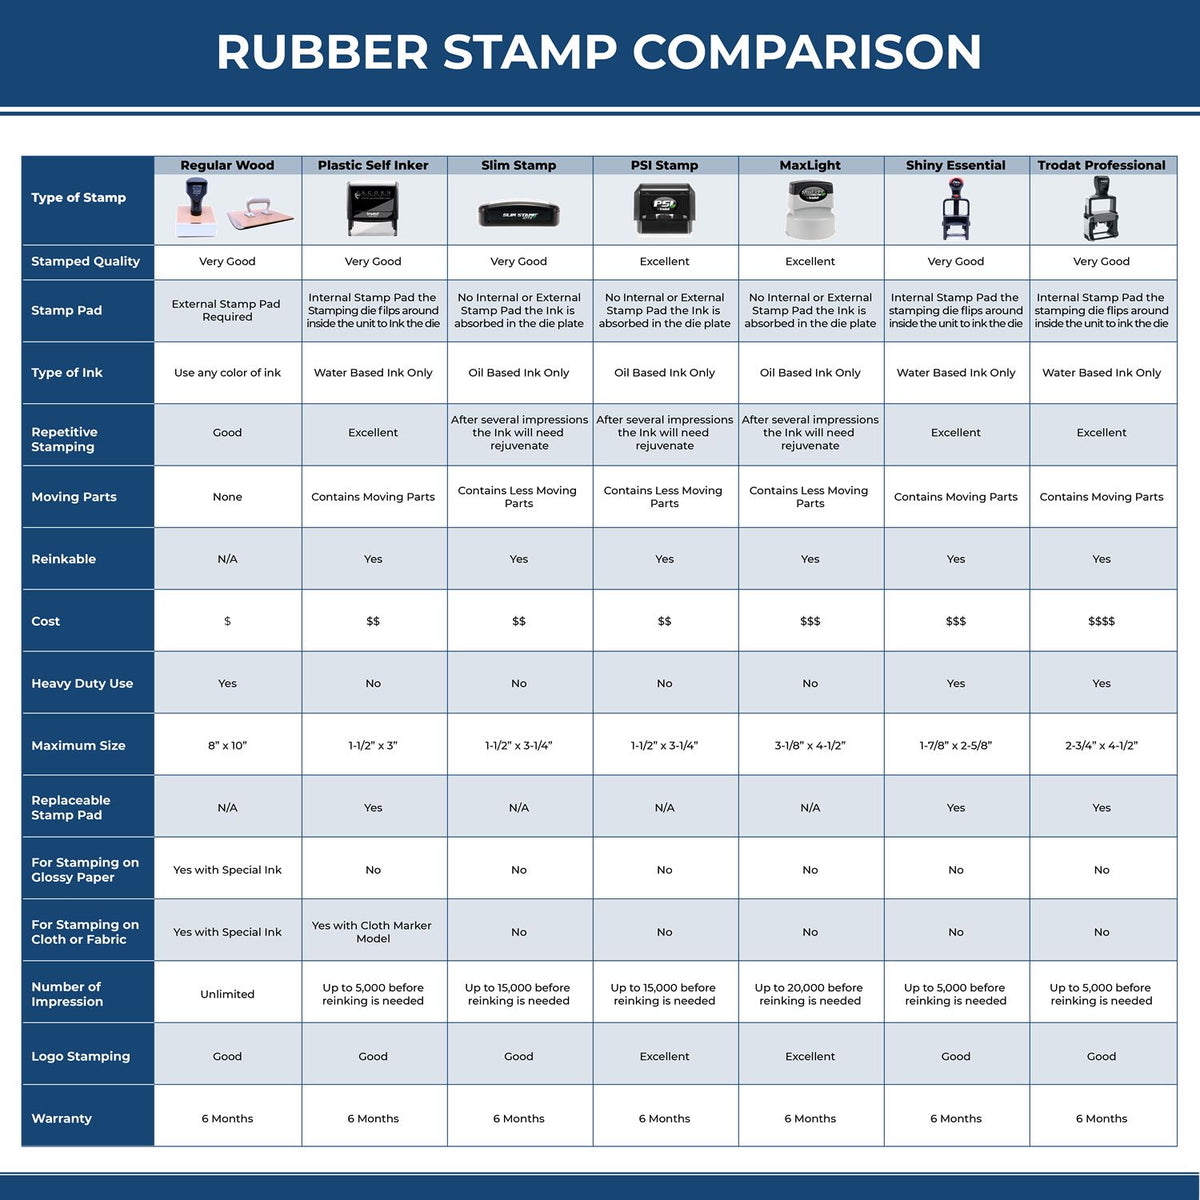 A comparison chart for the different types of mount models available for the PSI Maryland Notary Stamp.